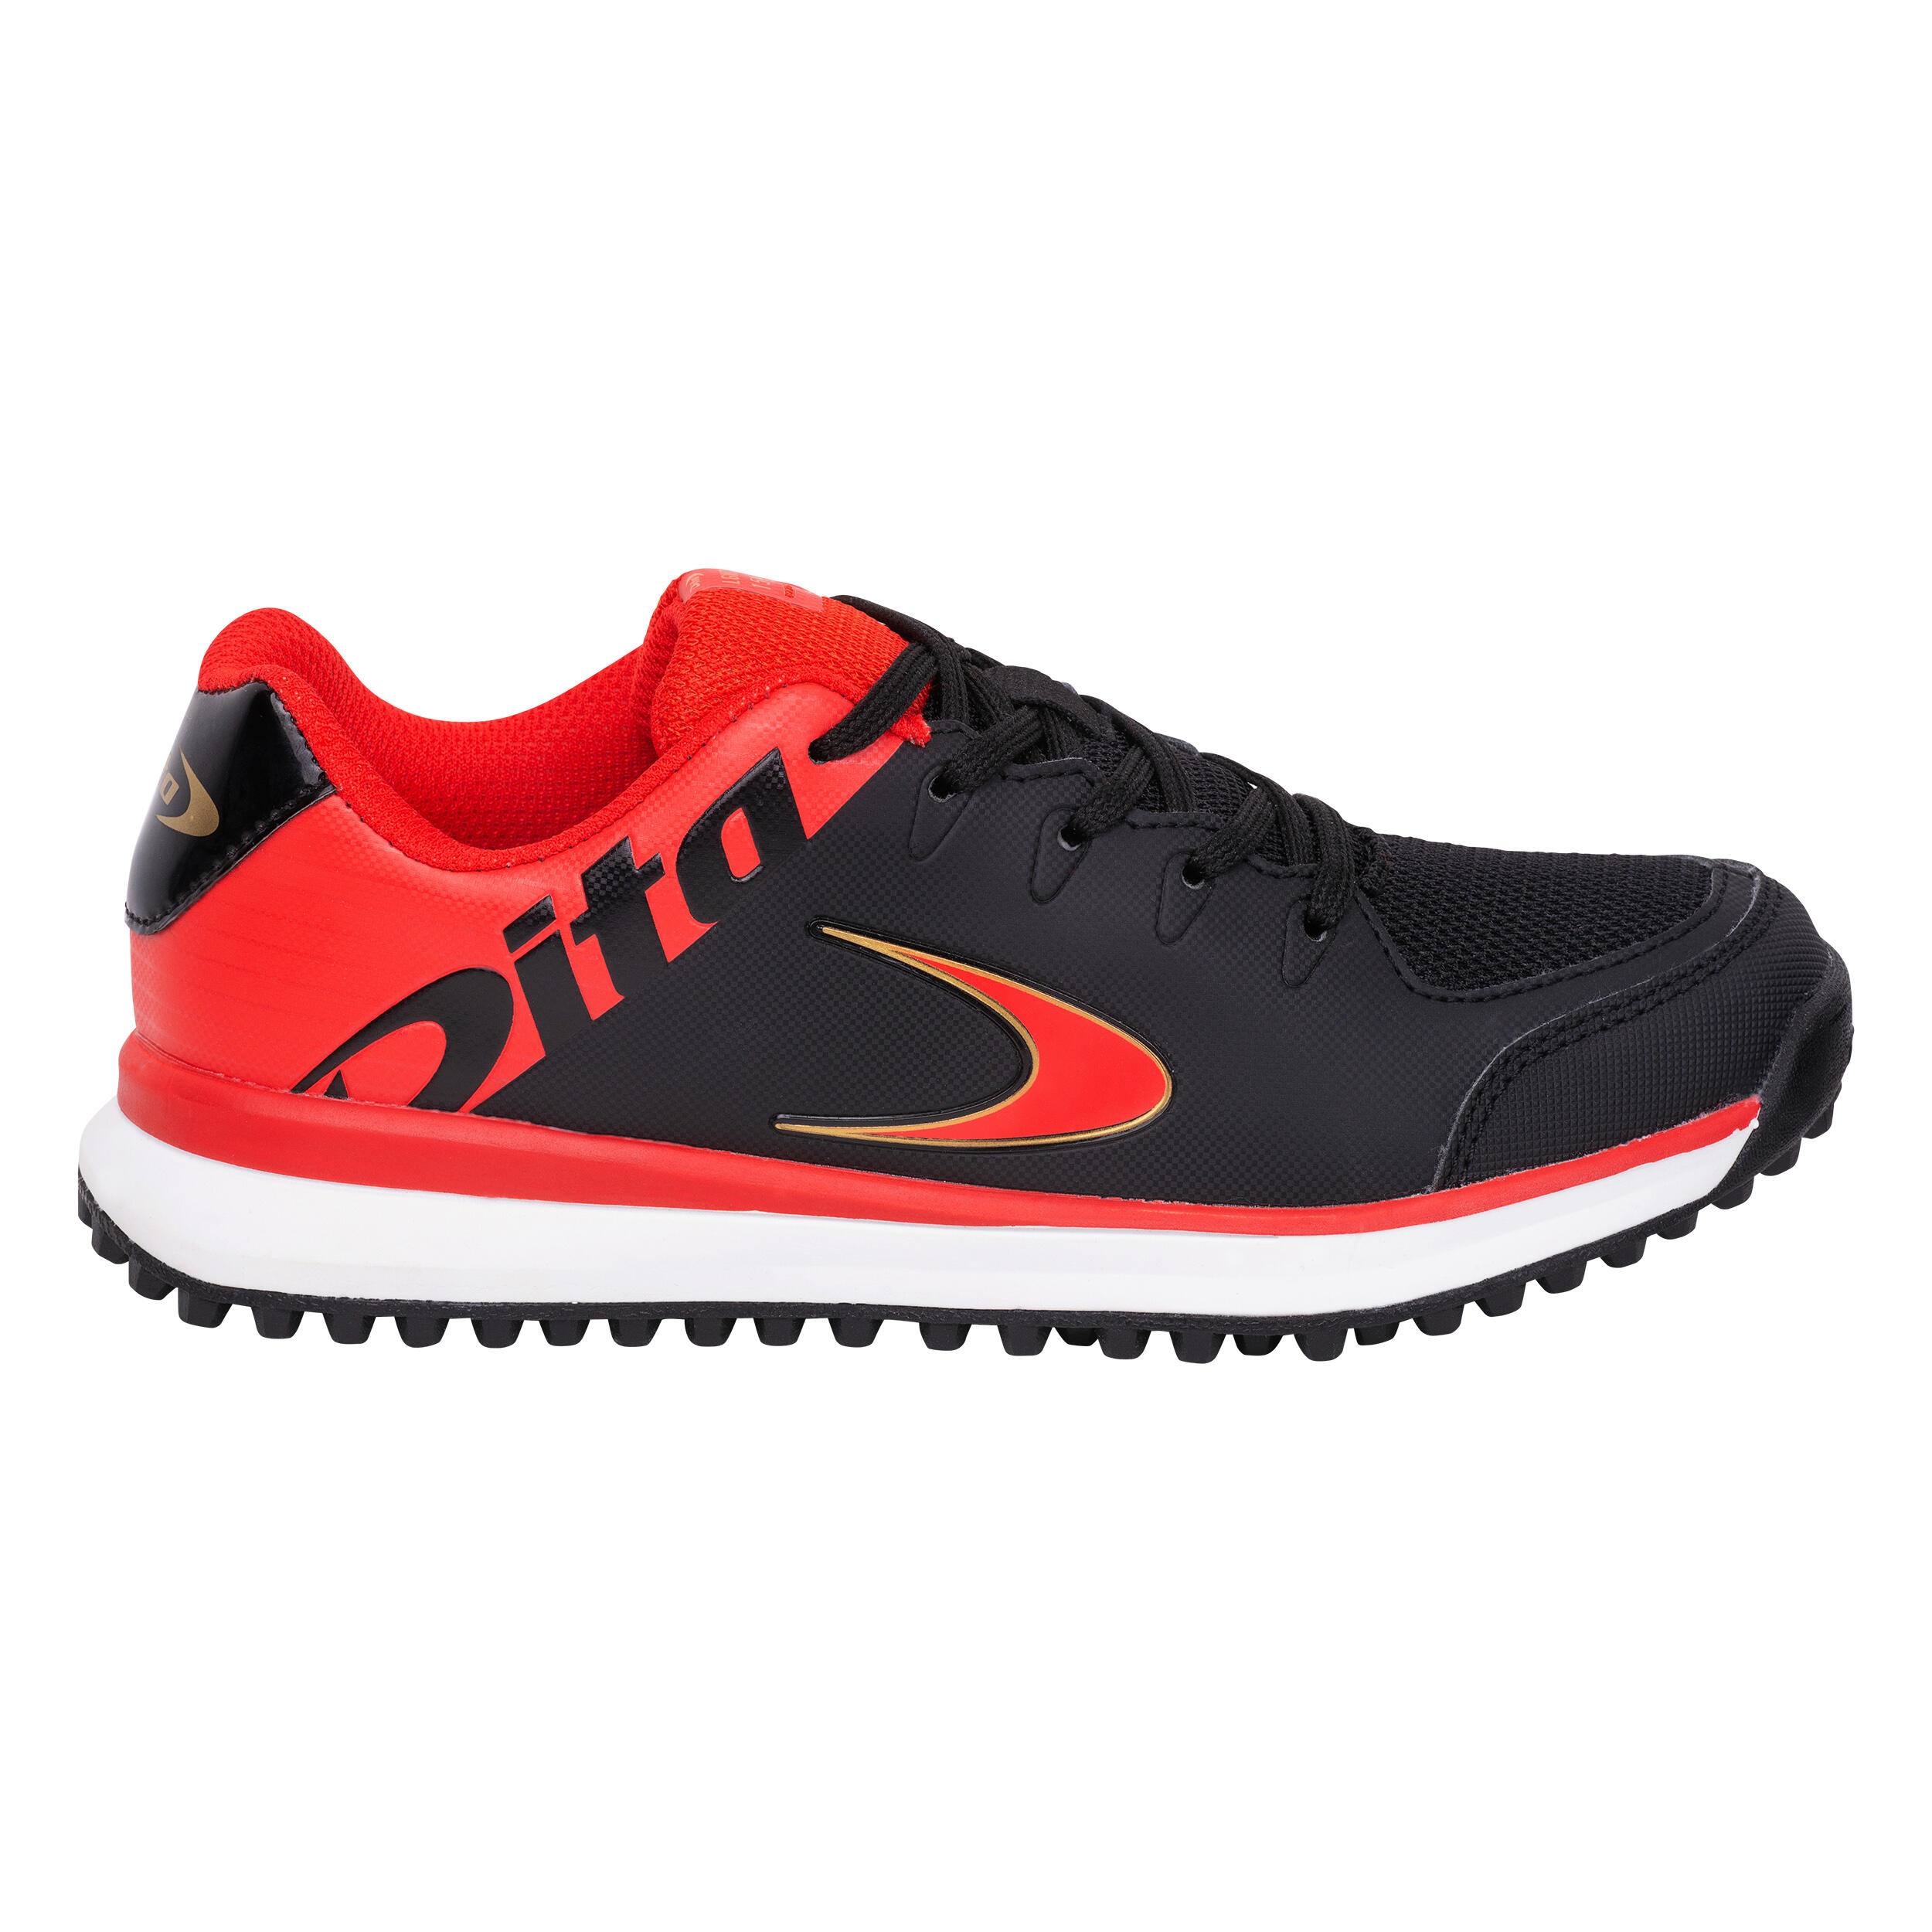 Teens' Low- to Moderate-Intensity Field Hockey Shoes LGHT 150 - Red/Black 1/7